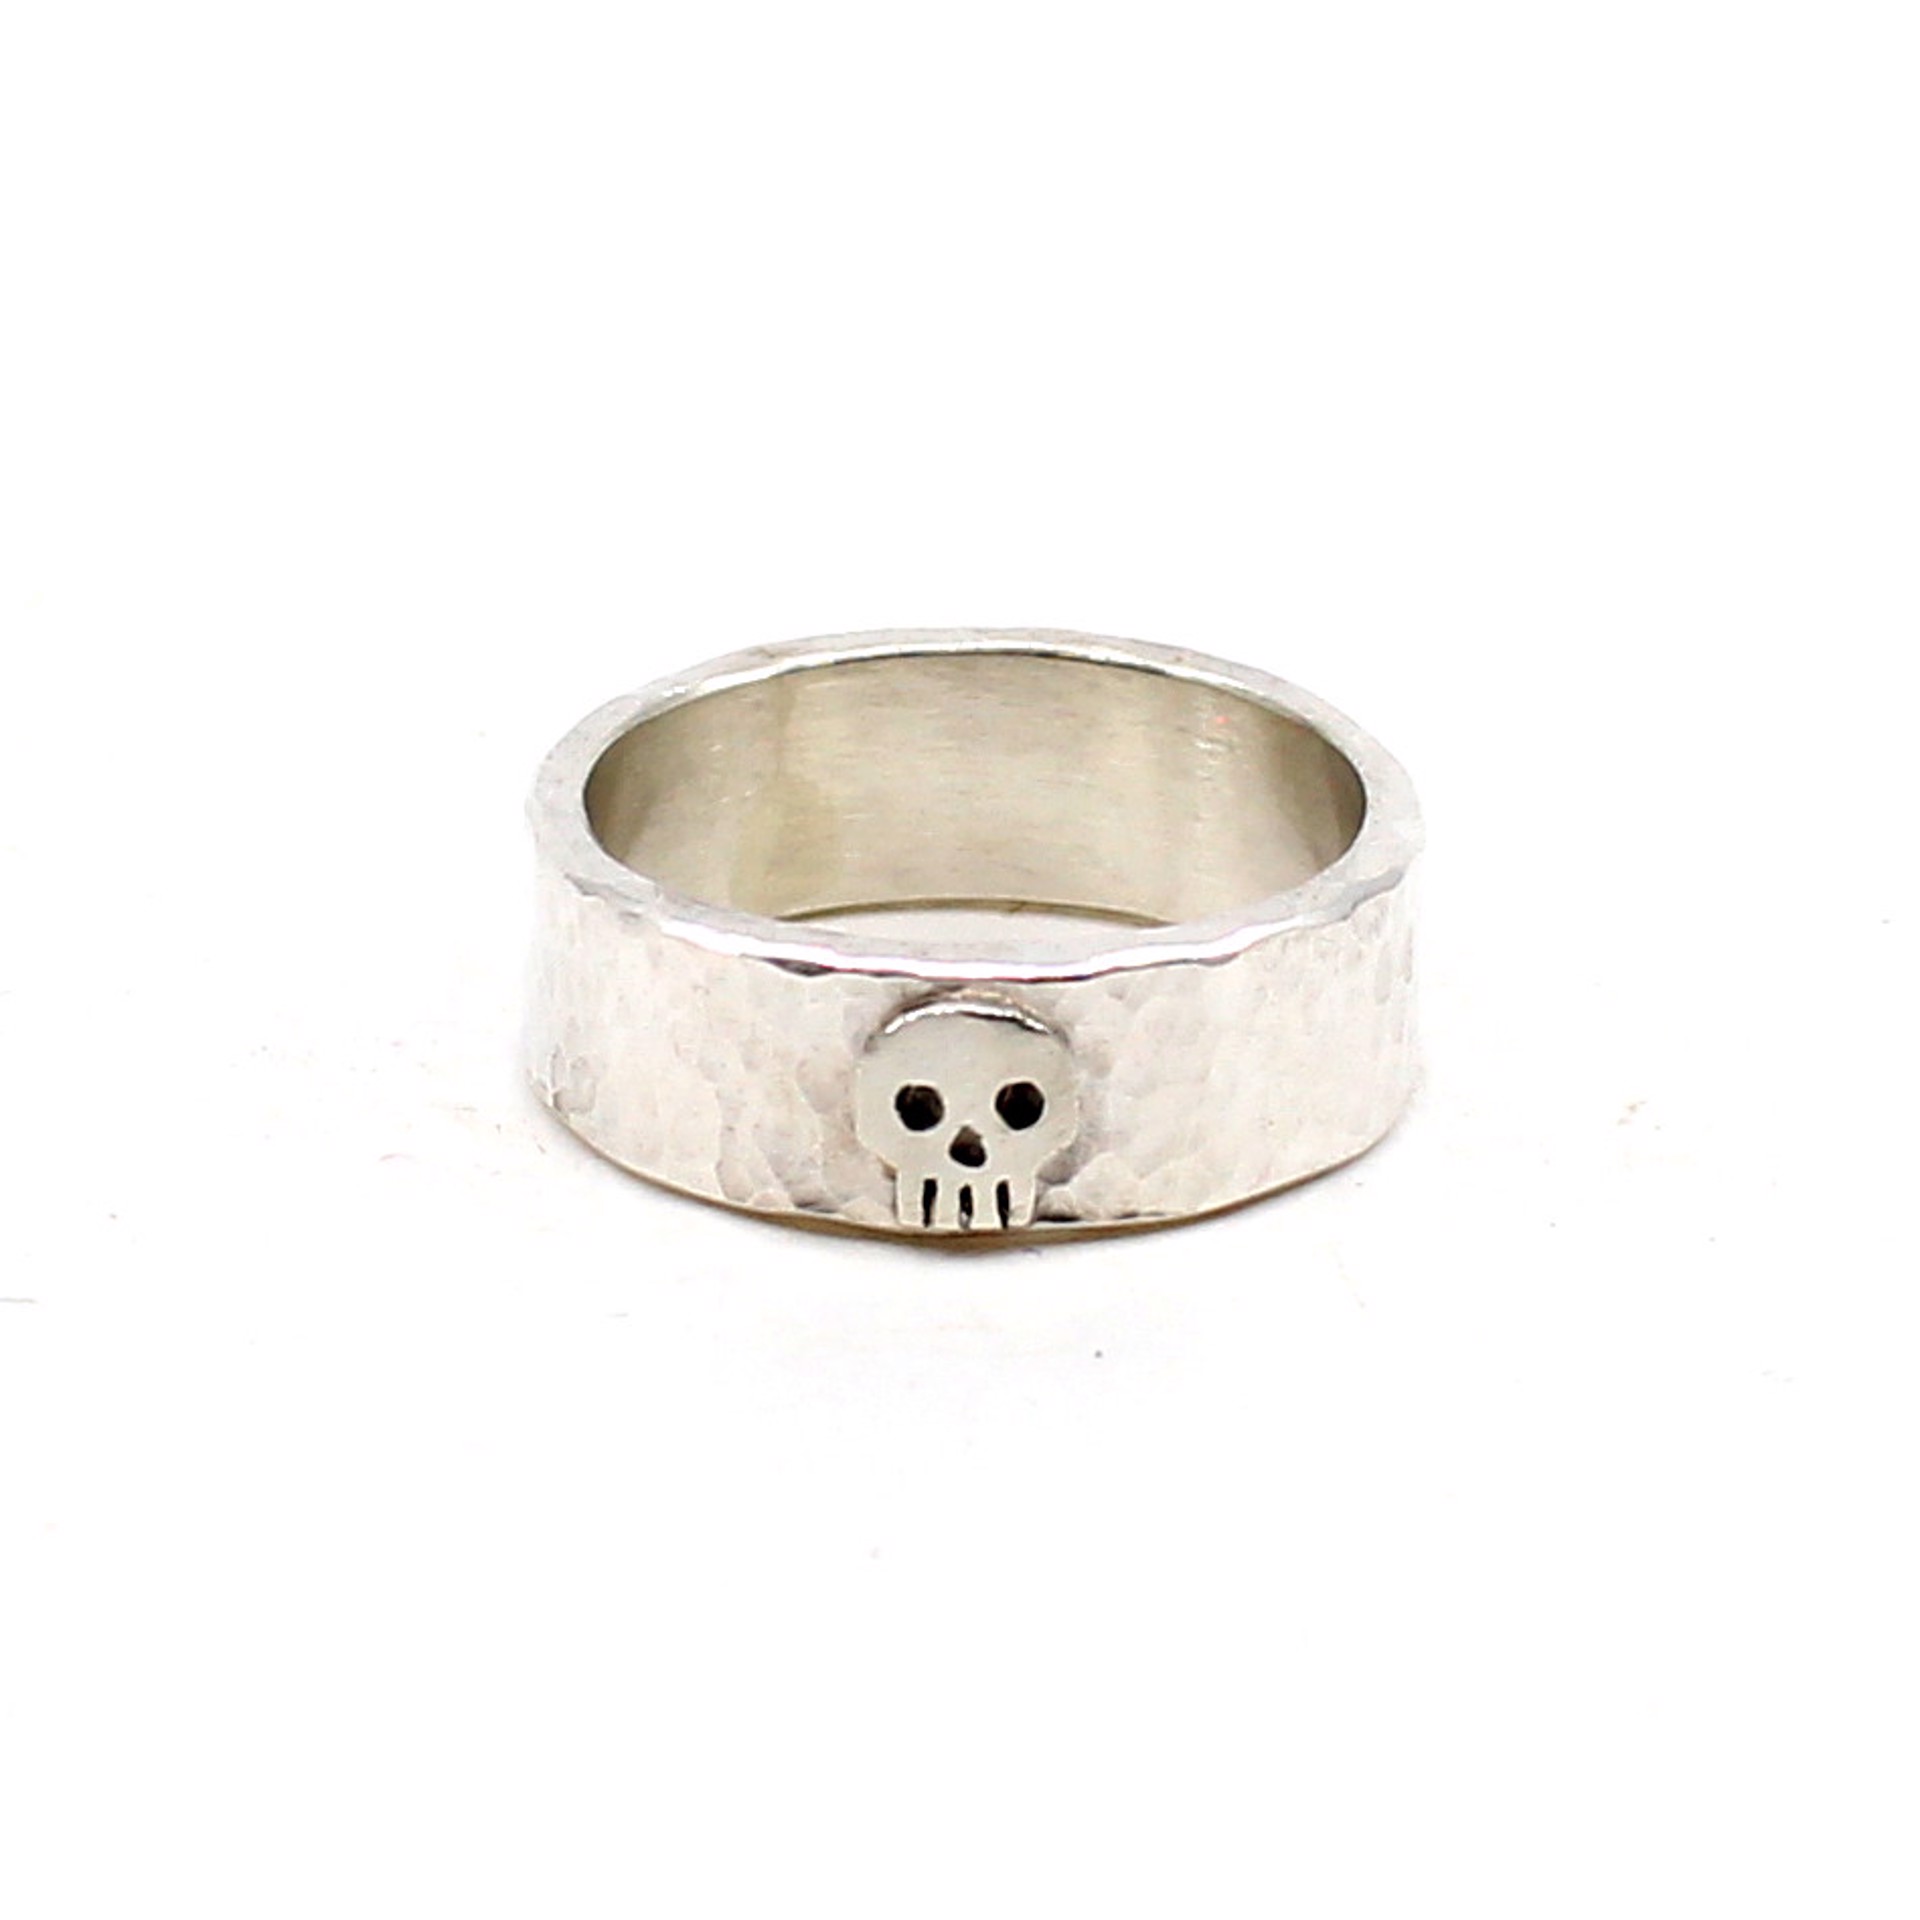 Single Skull Ring (size 8) by Susan Elnora